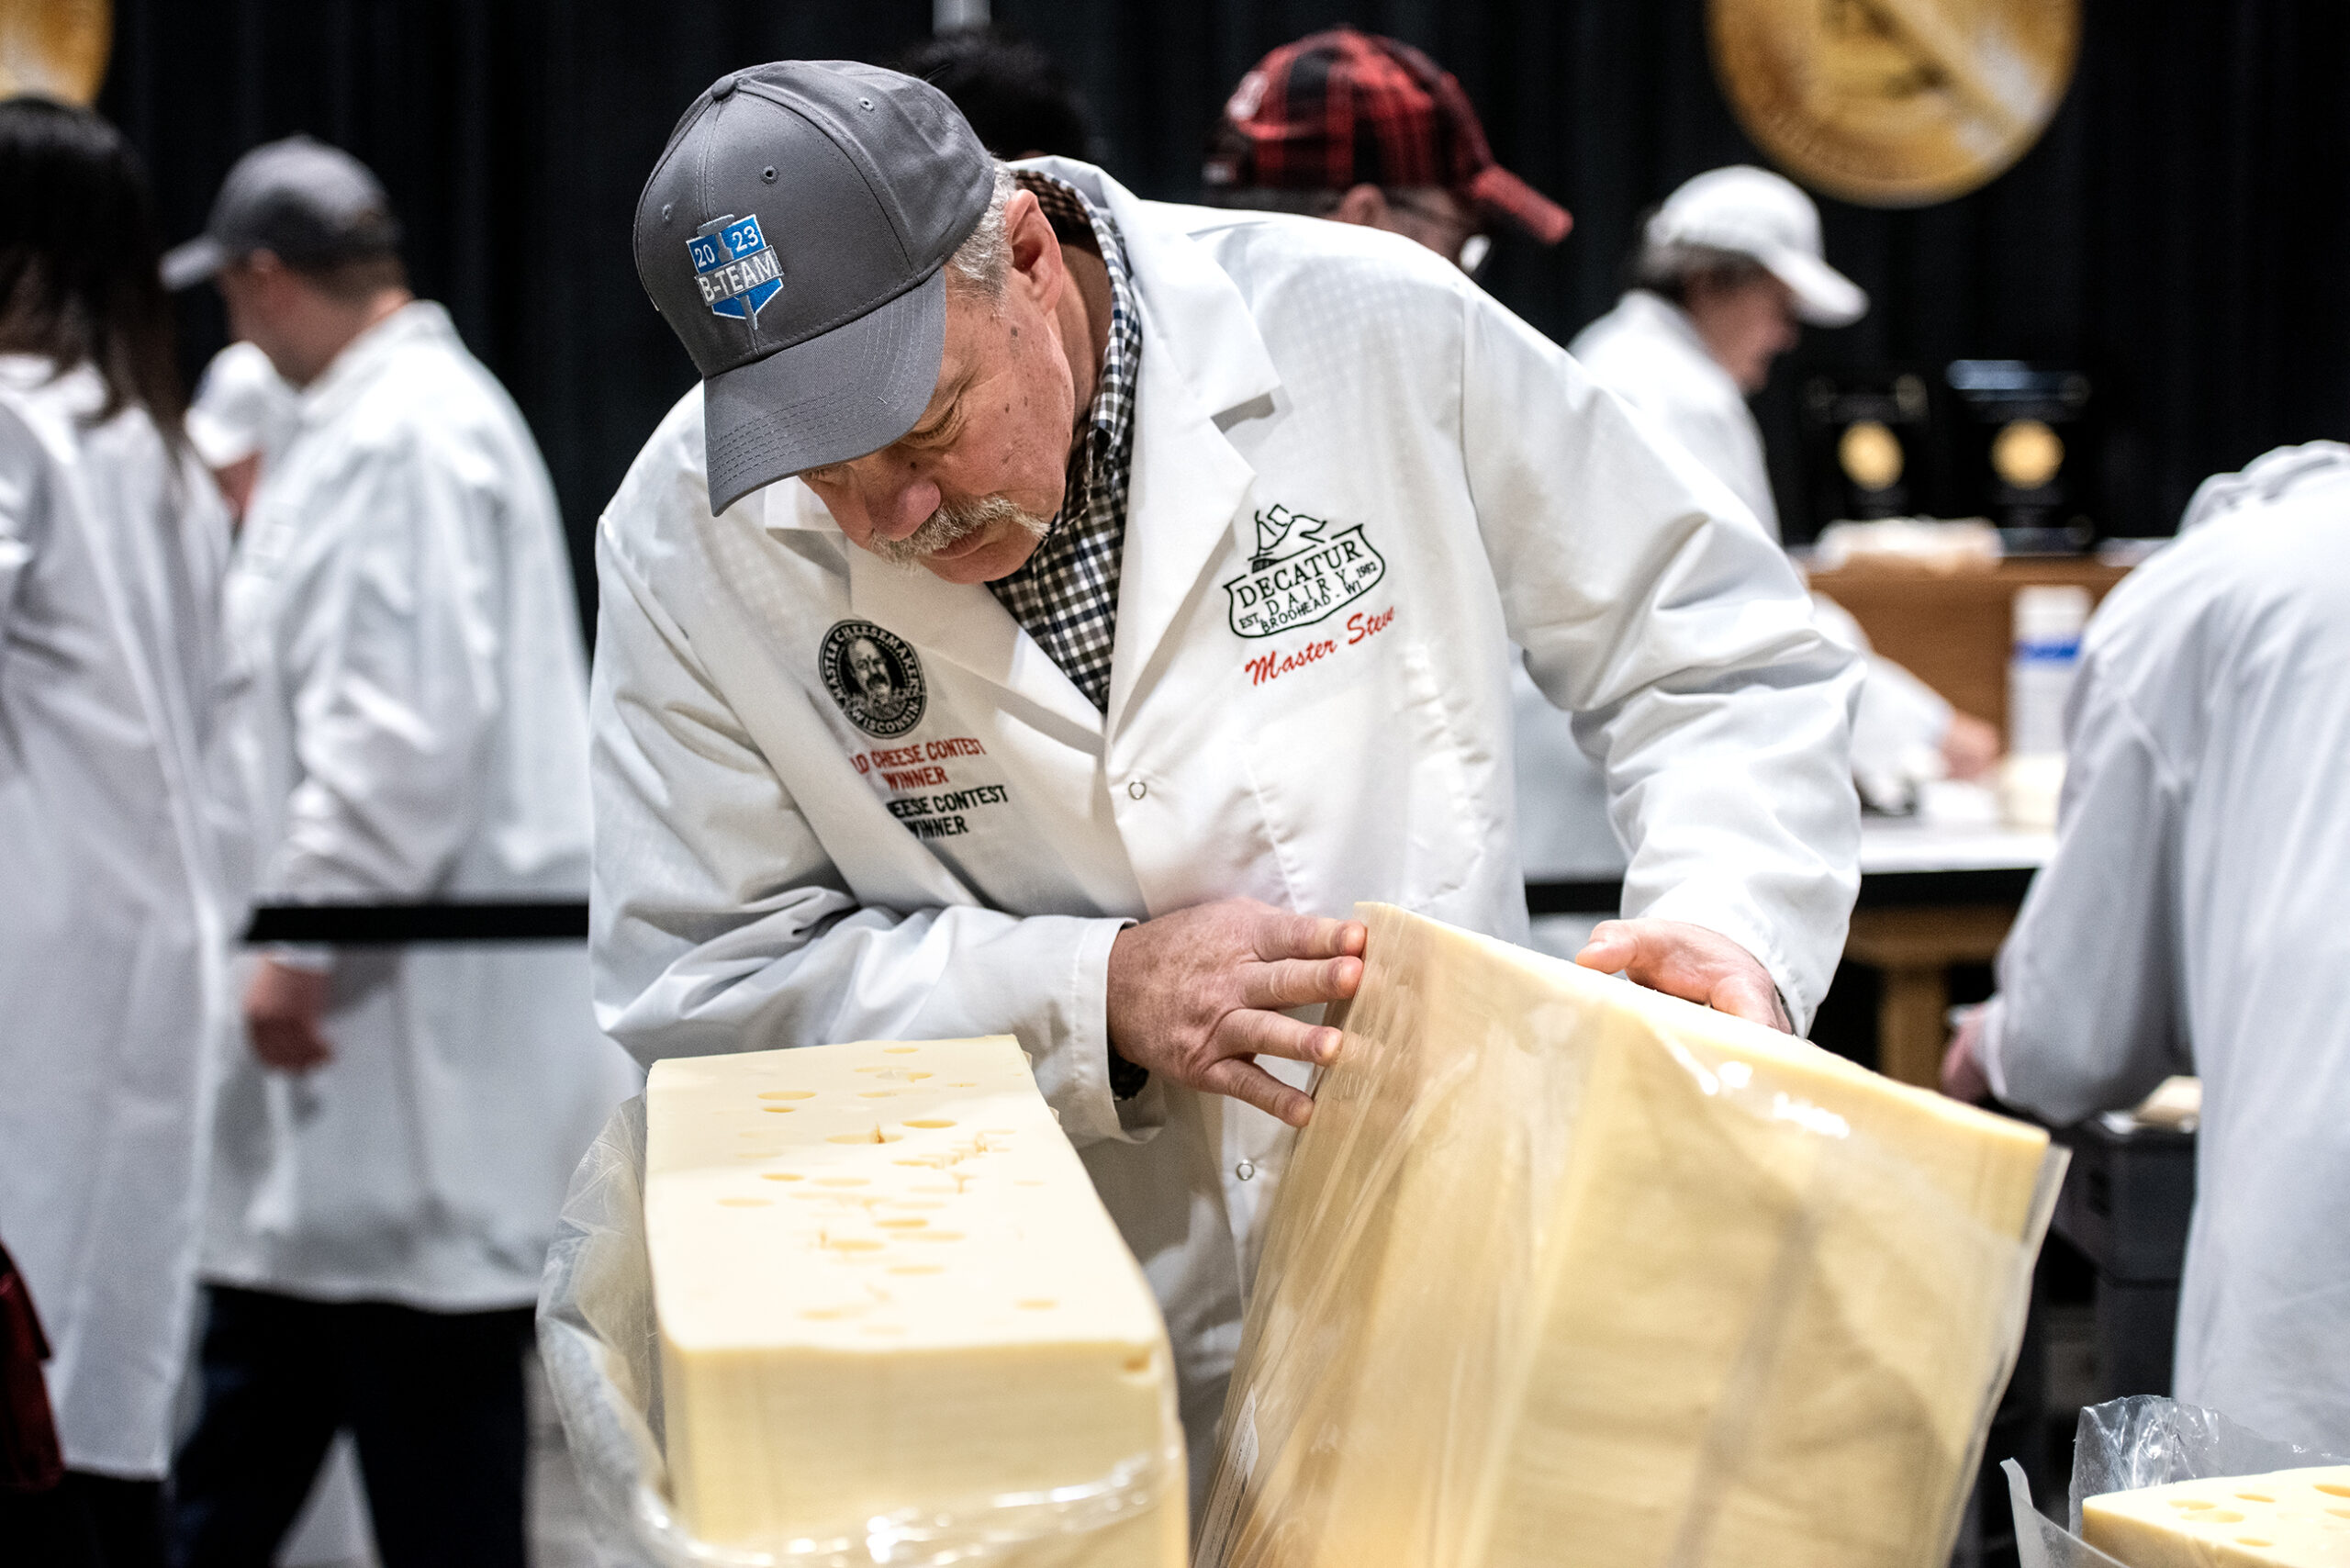 A large block of Swiss cheese is examined.